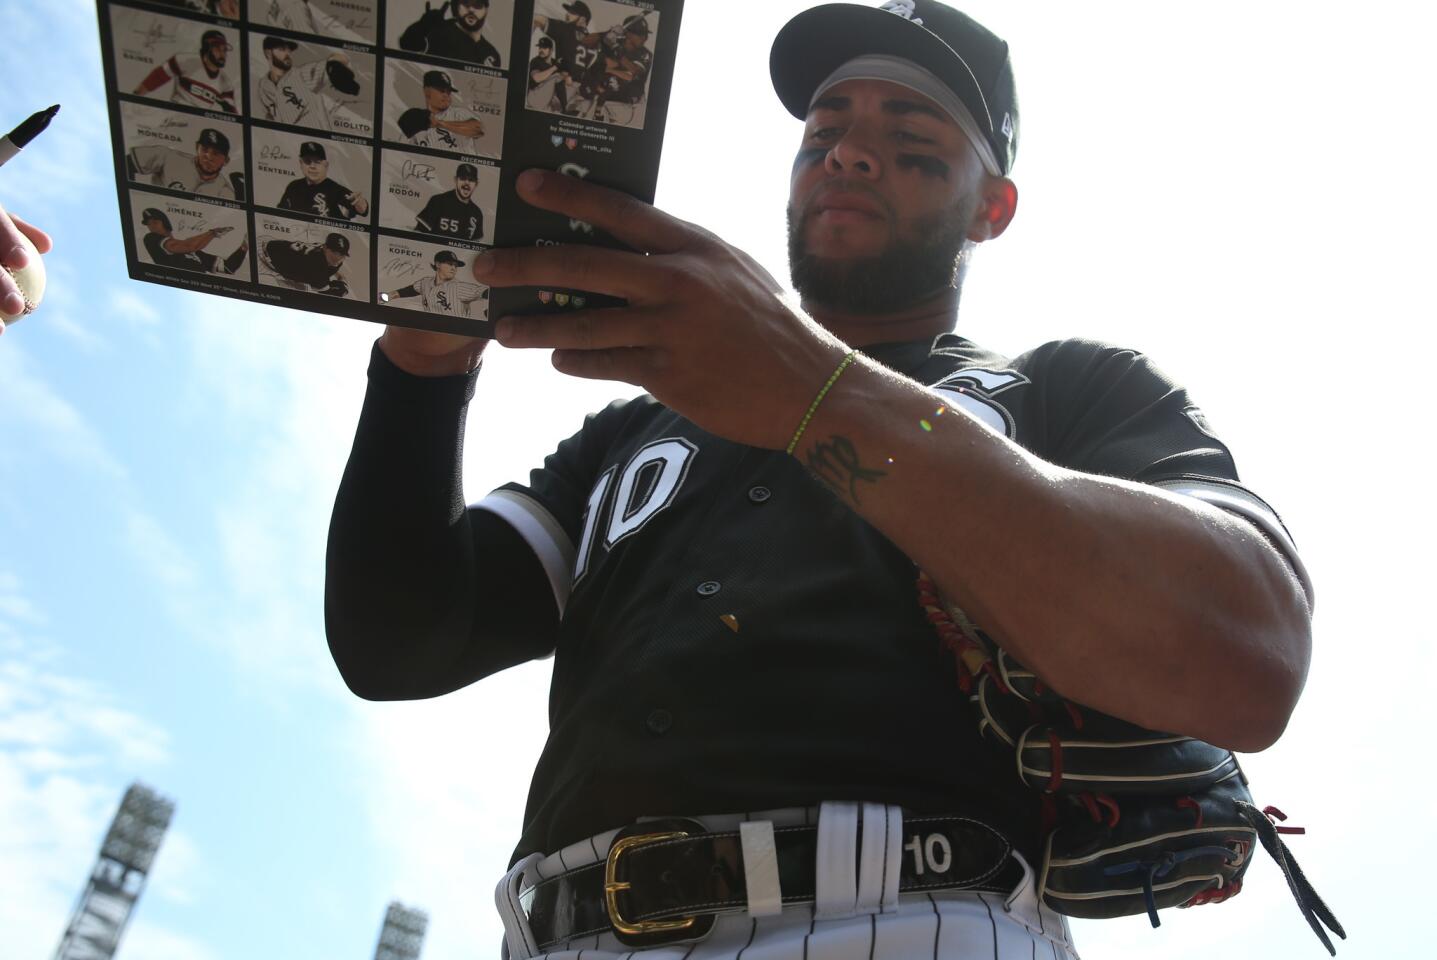 White Sox third baseman Yoan Moncada signs autographs before a game against the Royals on April 17, 2019, at Guaranteed Rate Field.